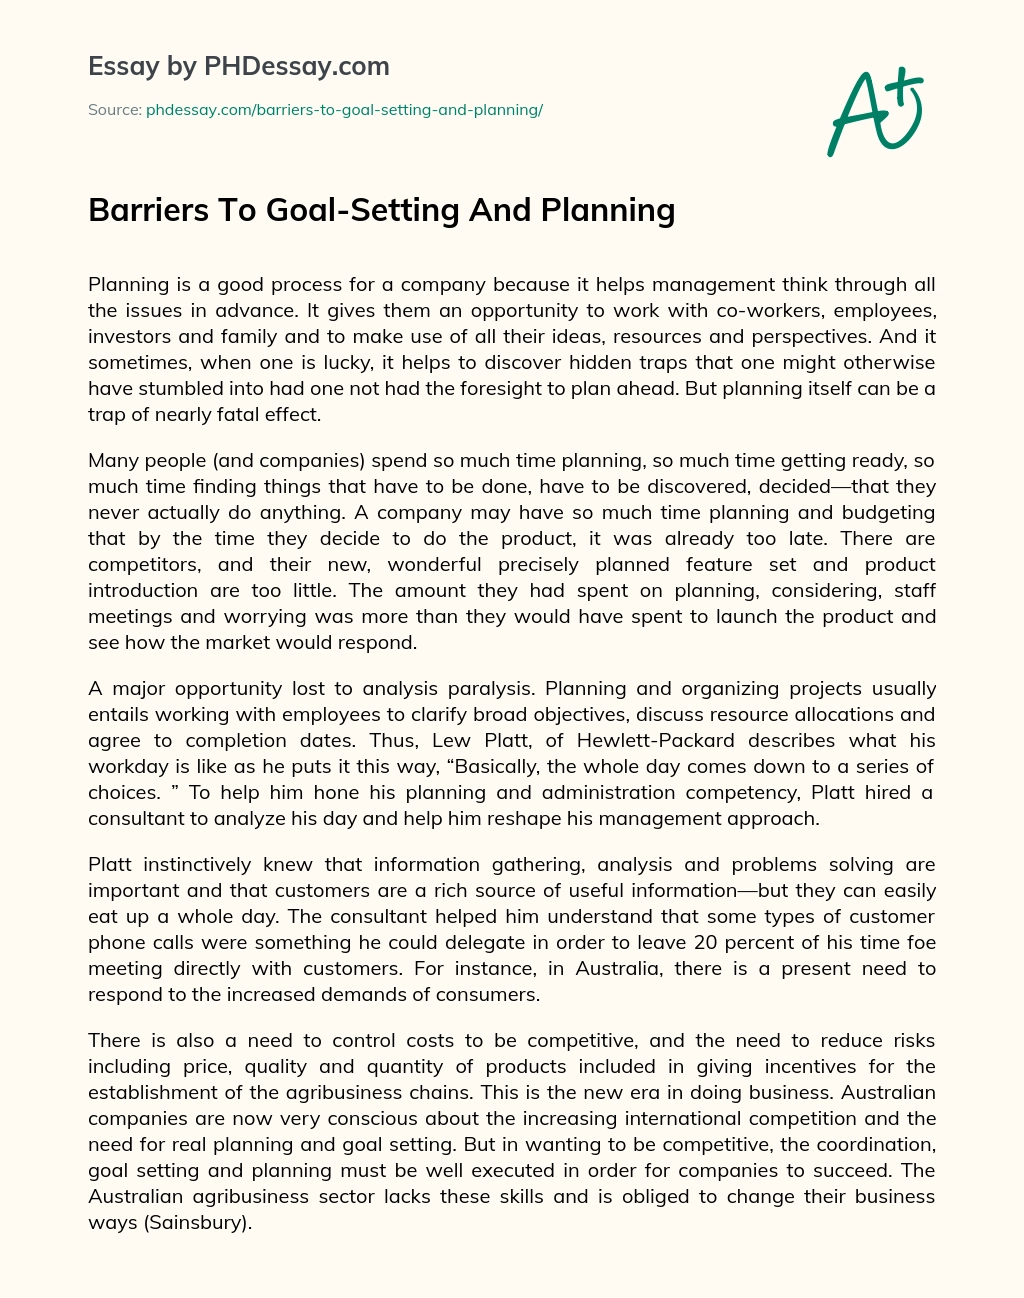 Barriers To Goal-Setting And Planning essay